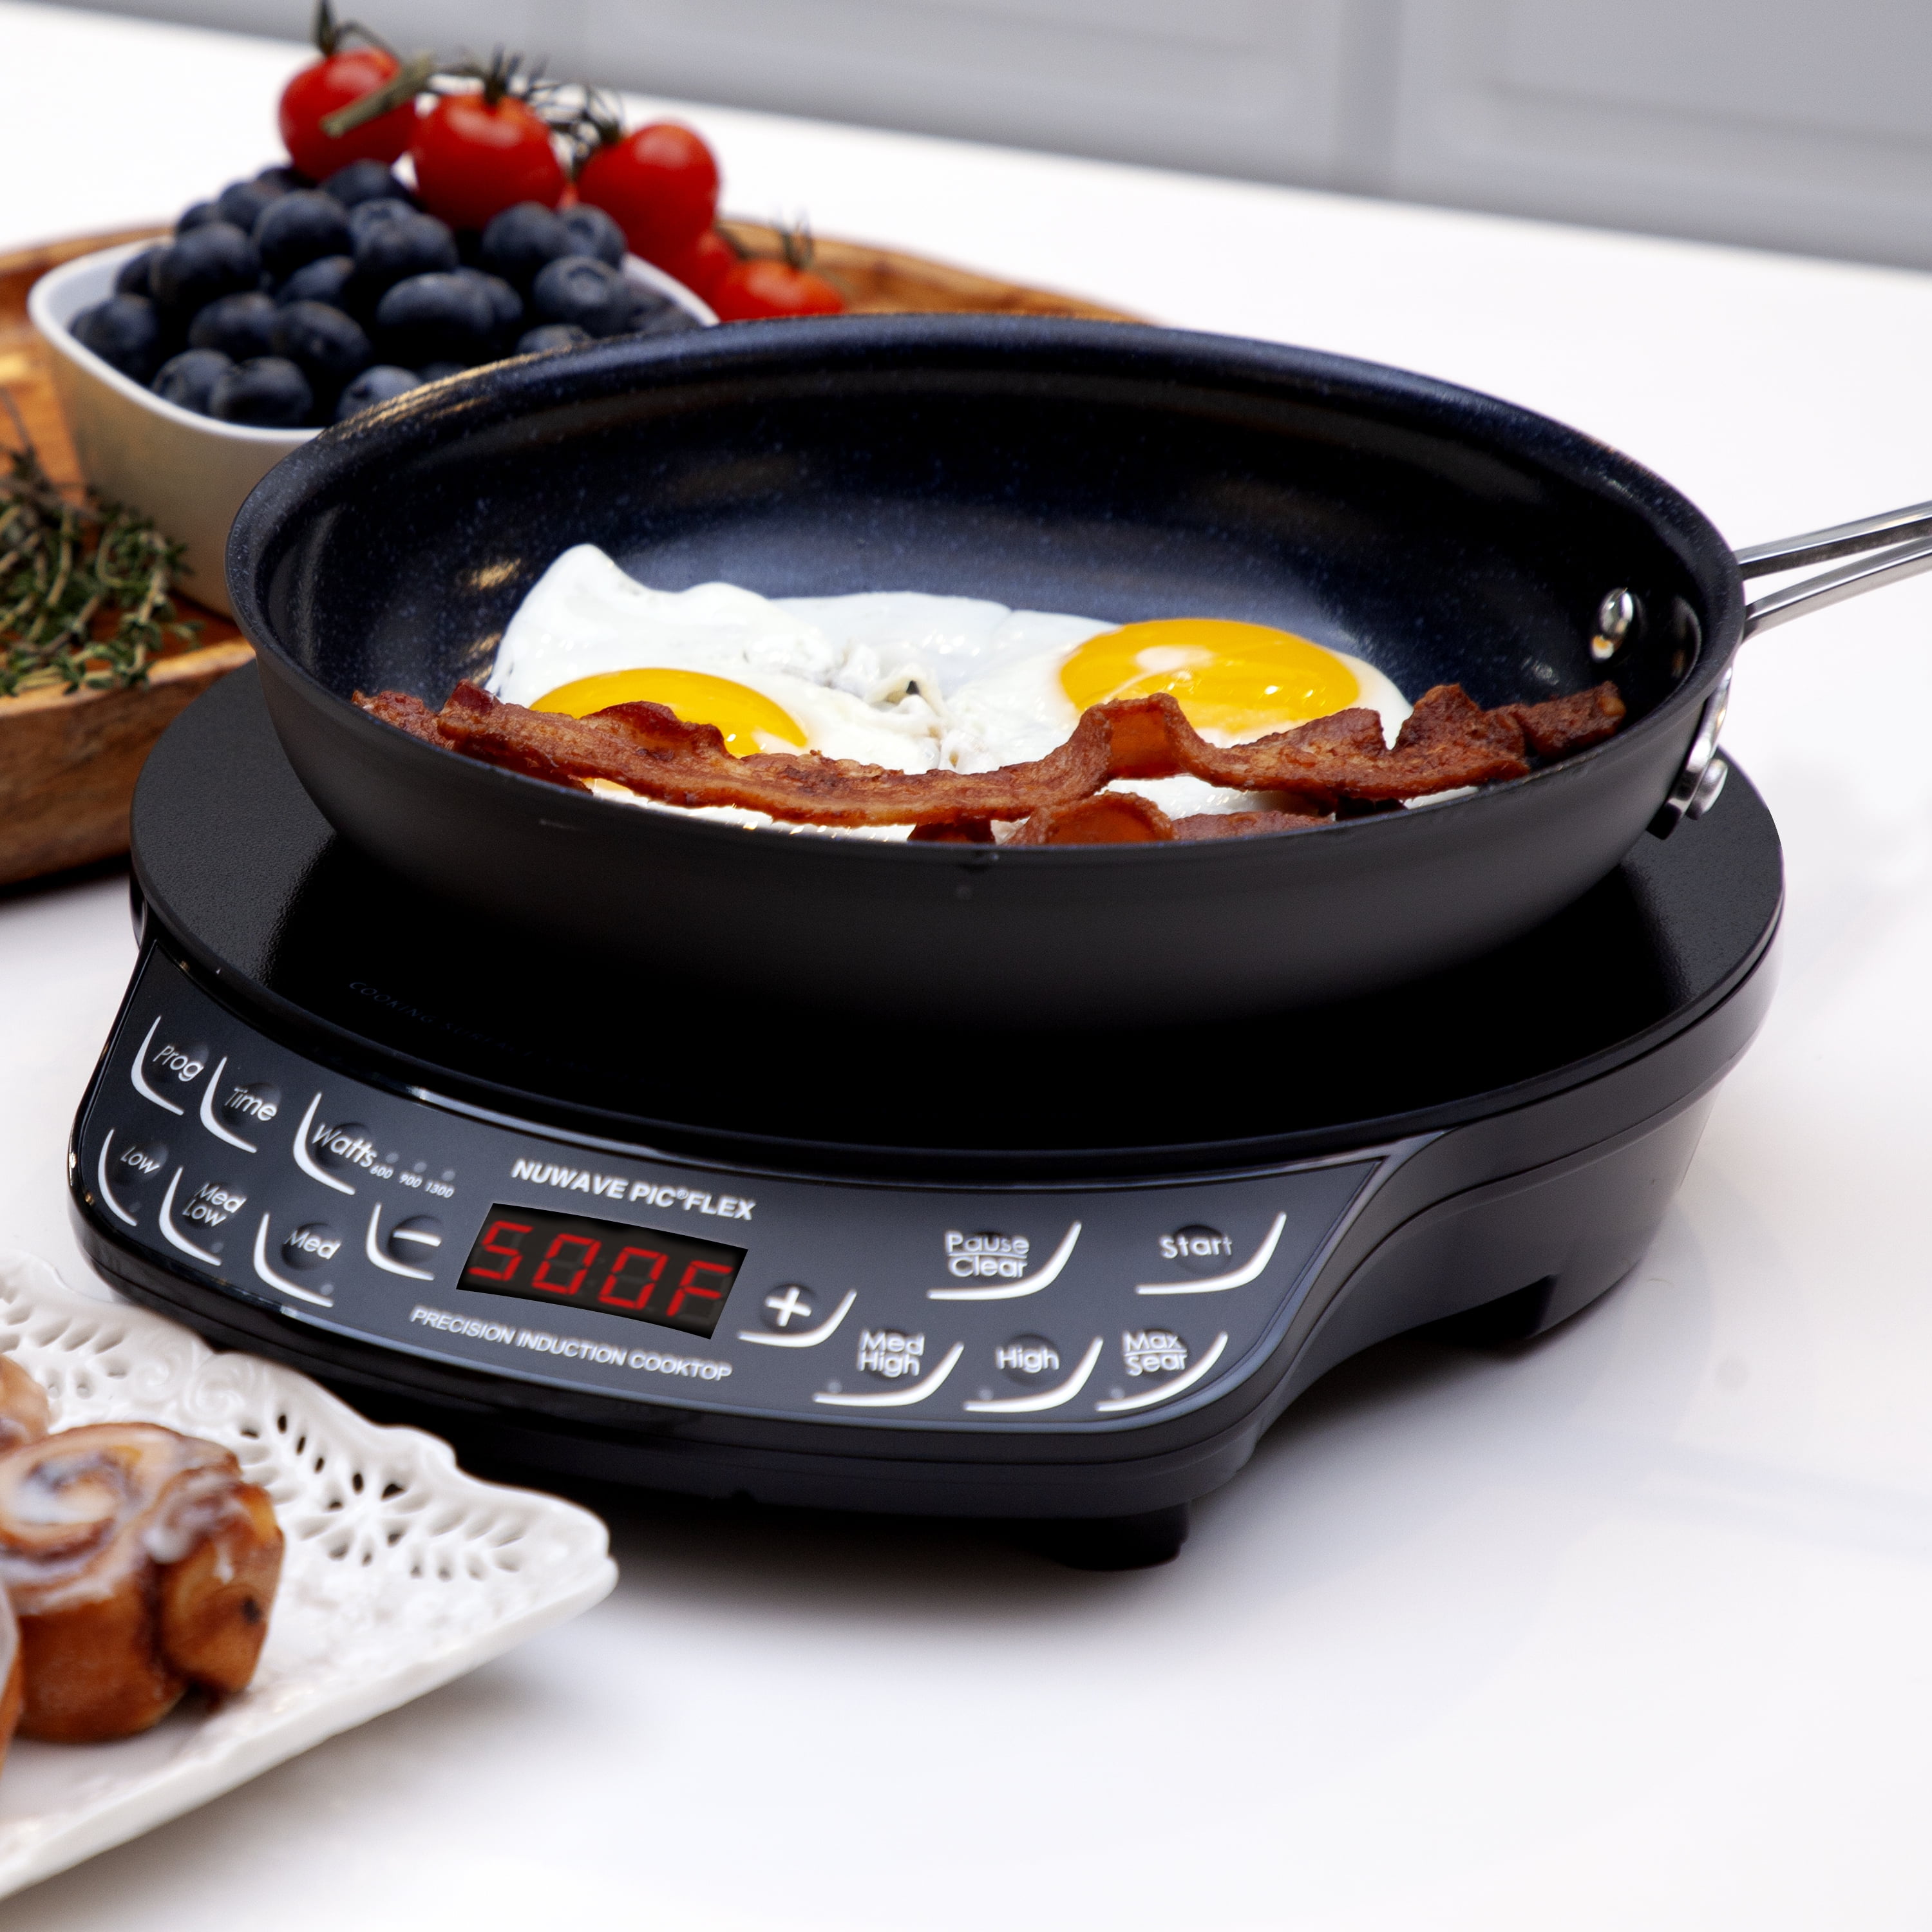 Nuwave Gold Induction Cooktop with 9-inch and 8-inch Fry Pan